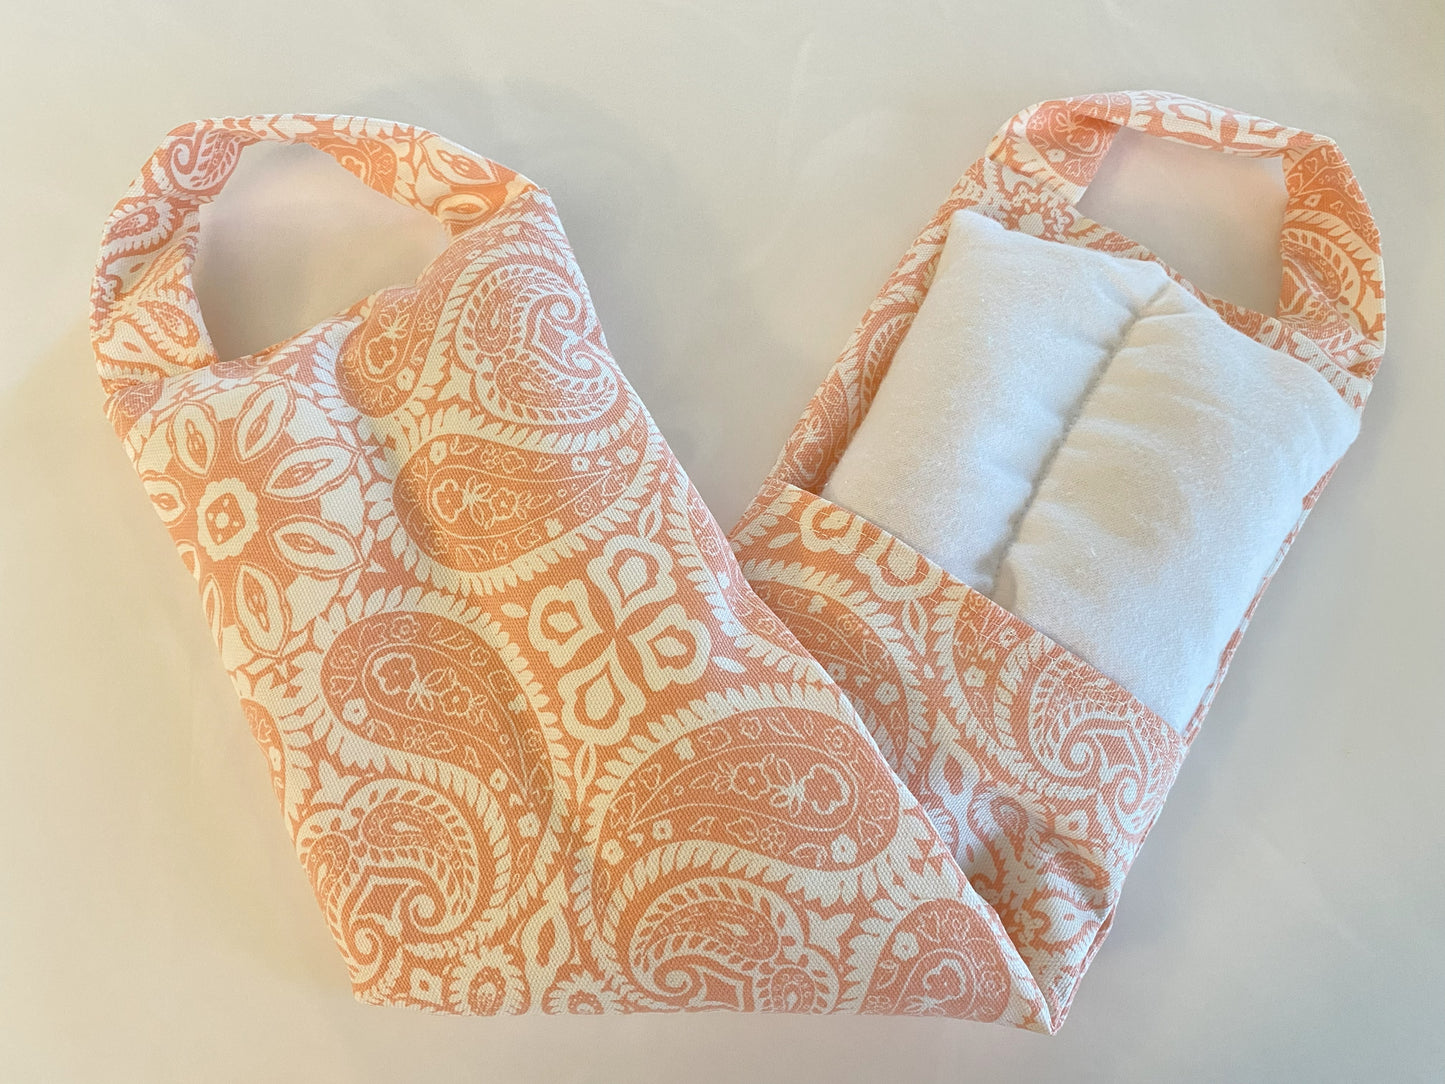 Washable Microwavable Rice Bag with Handles l Comfort Therapy Pack l Neck Wrap l Aromatherapy bag l Paisley